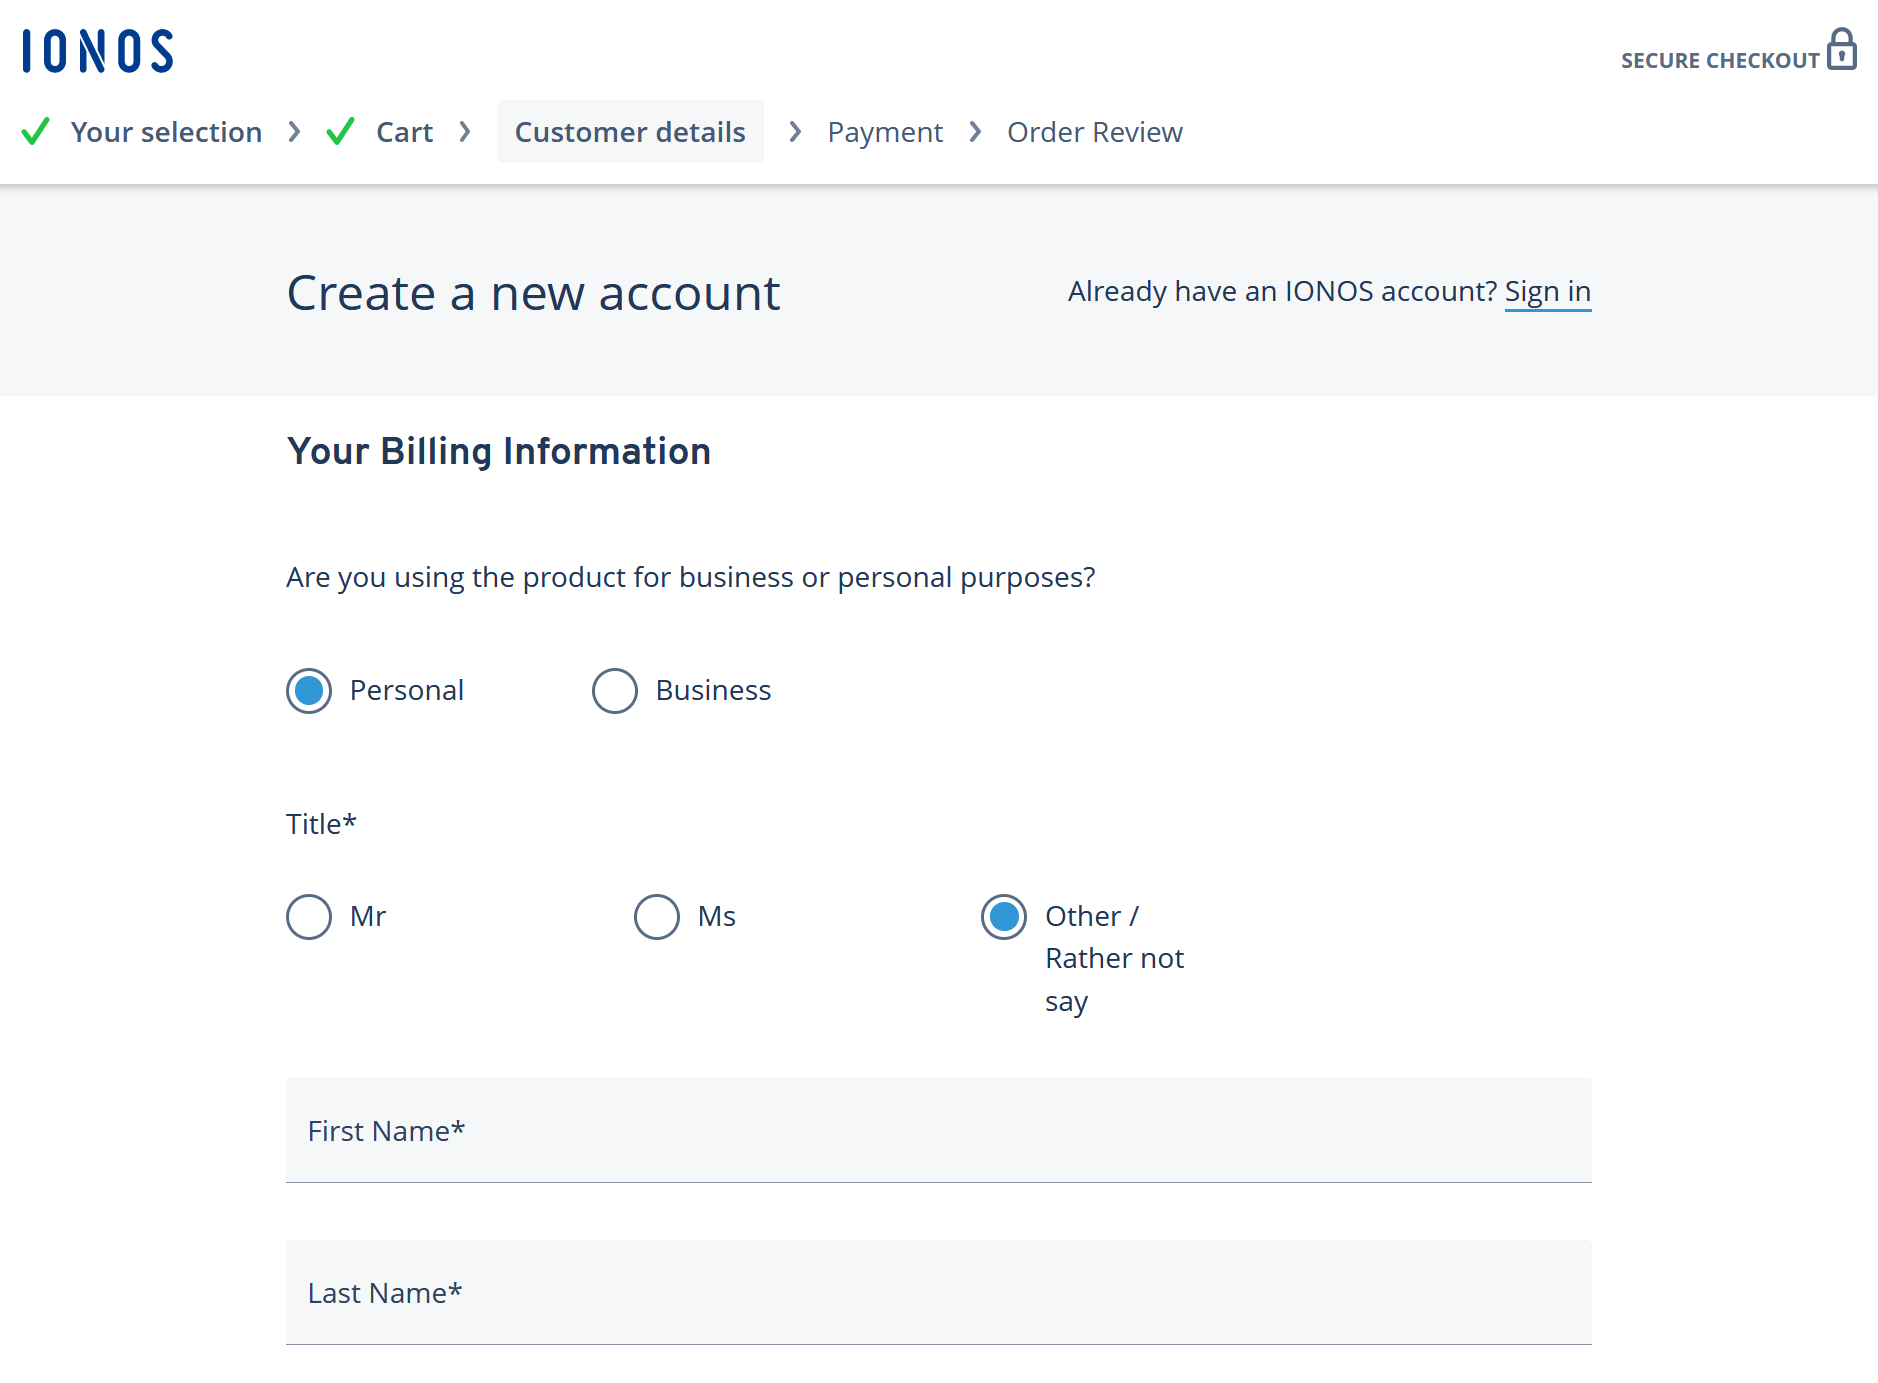 Screenshot of the order form for creating a customer account with IONOS